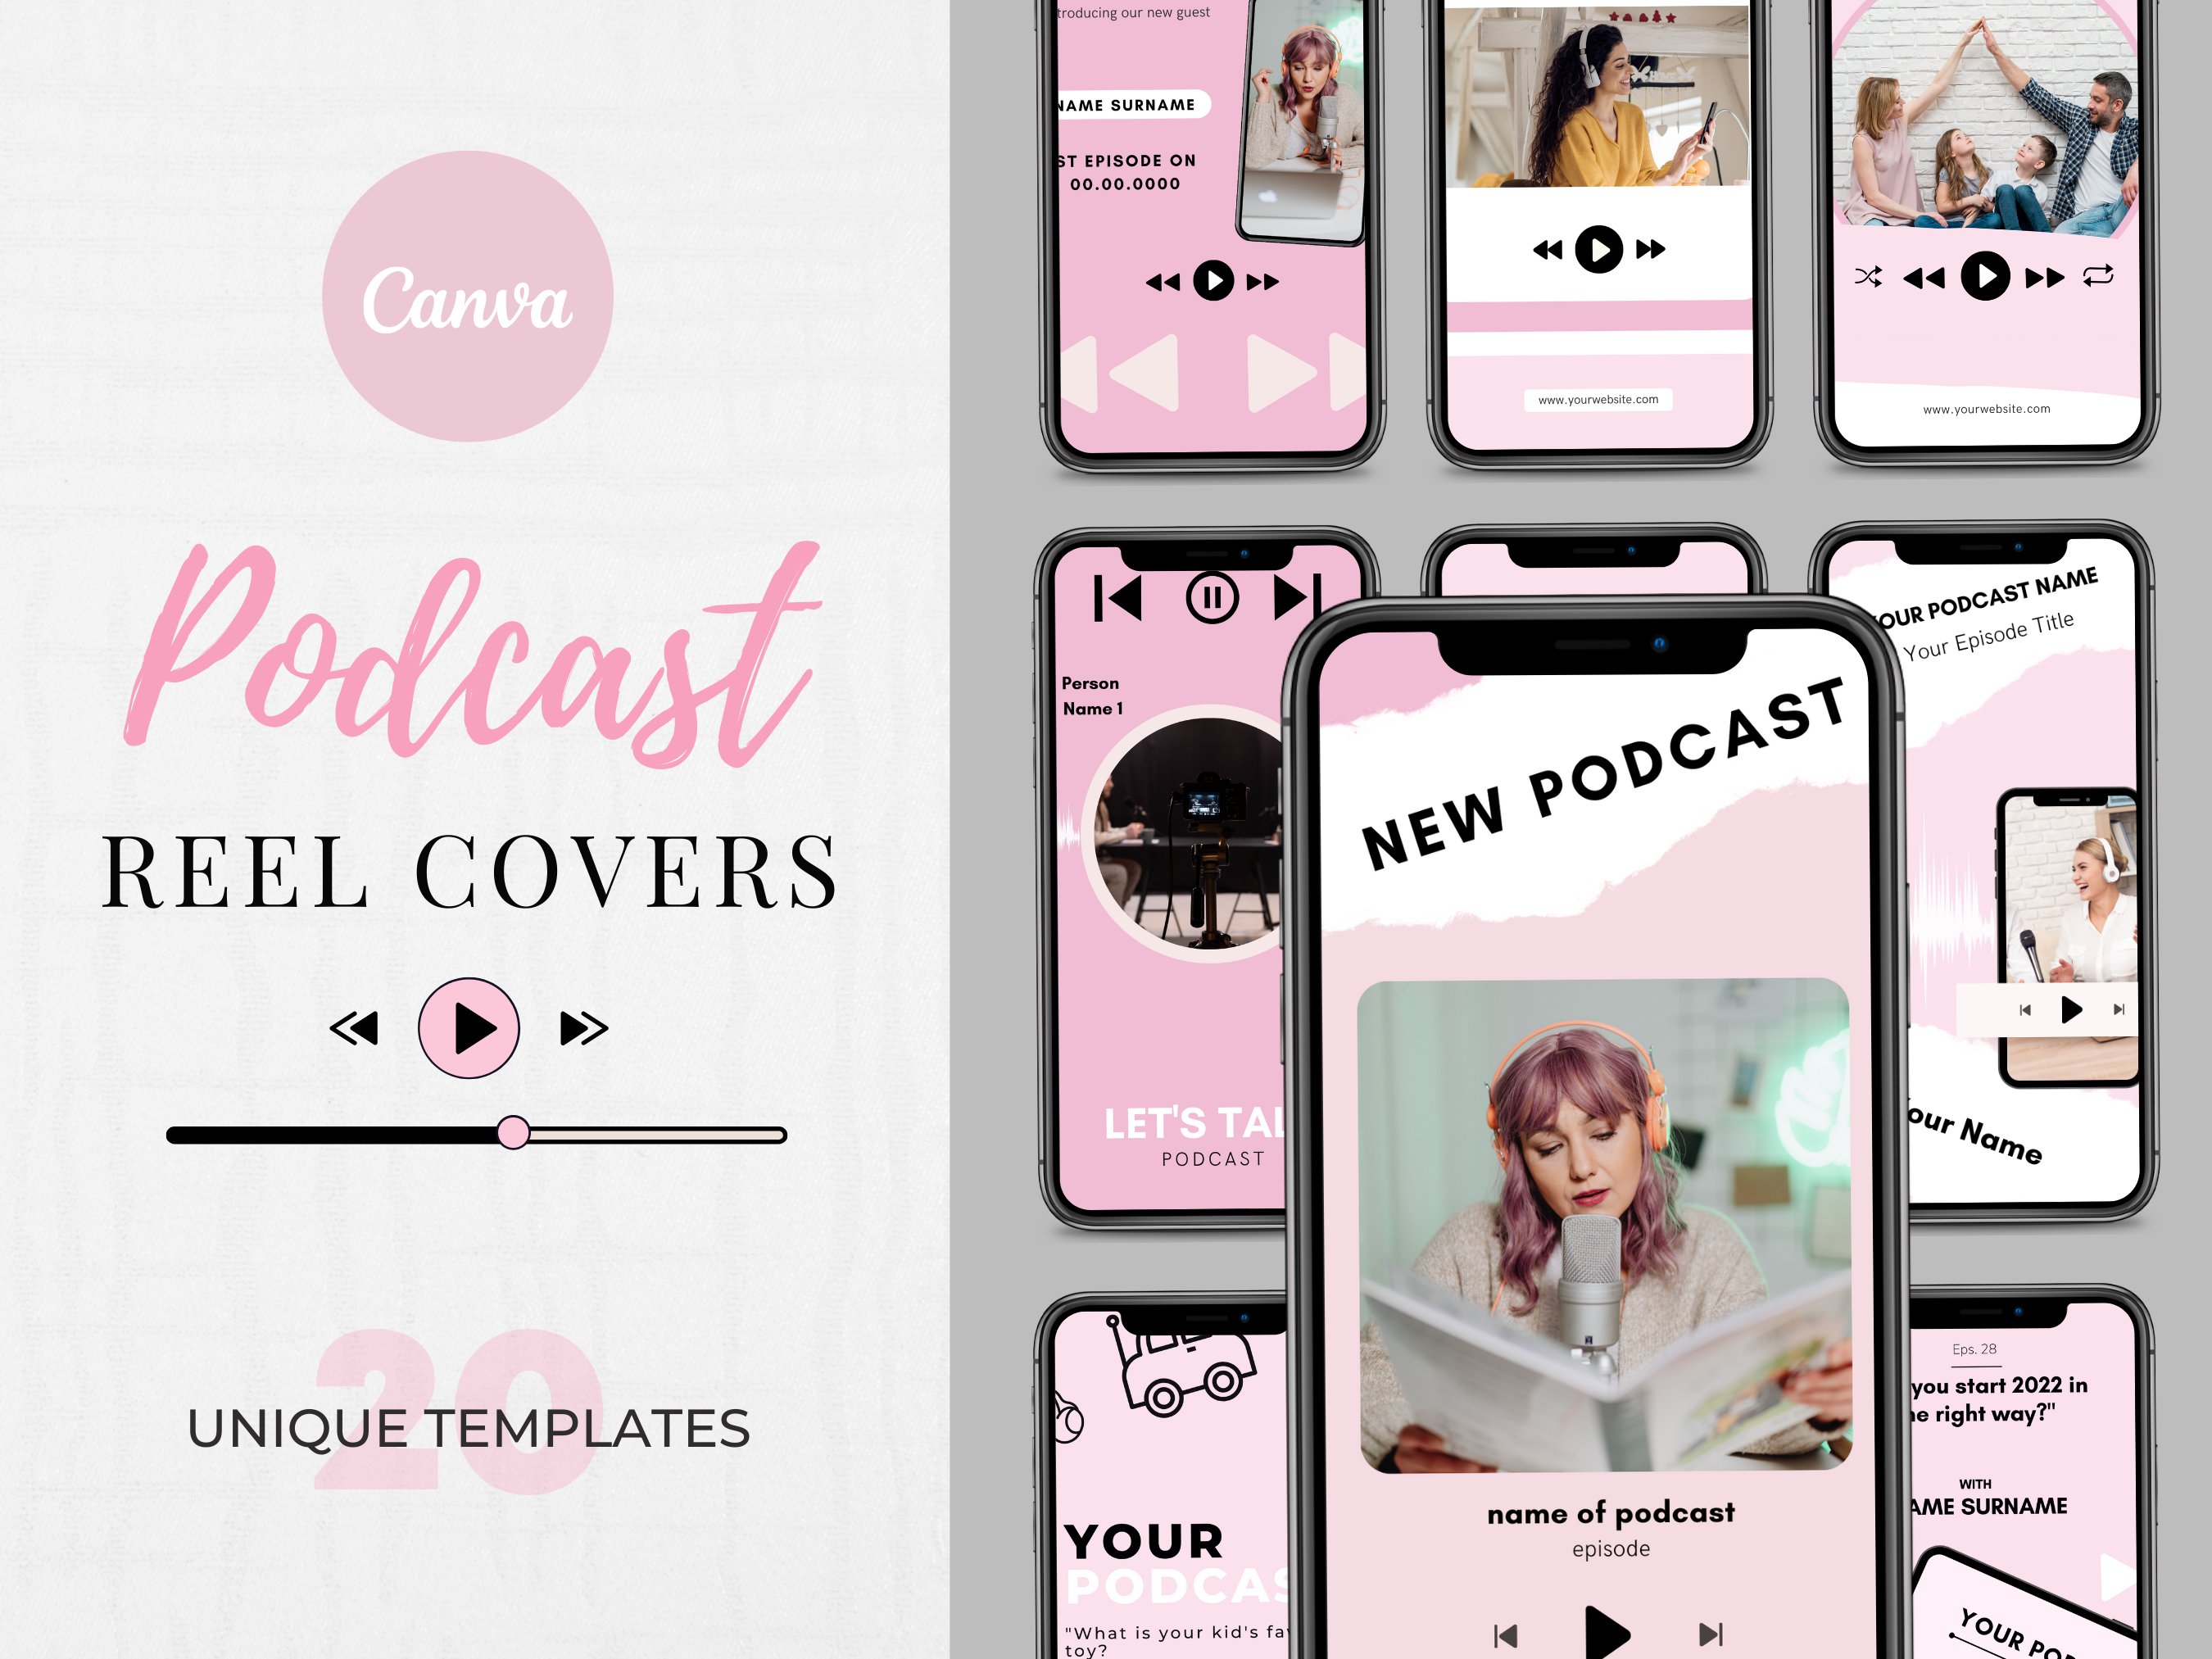 Instagram Reel Covers for Podcasts cover image.